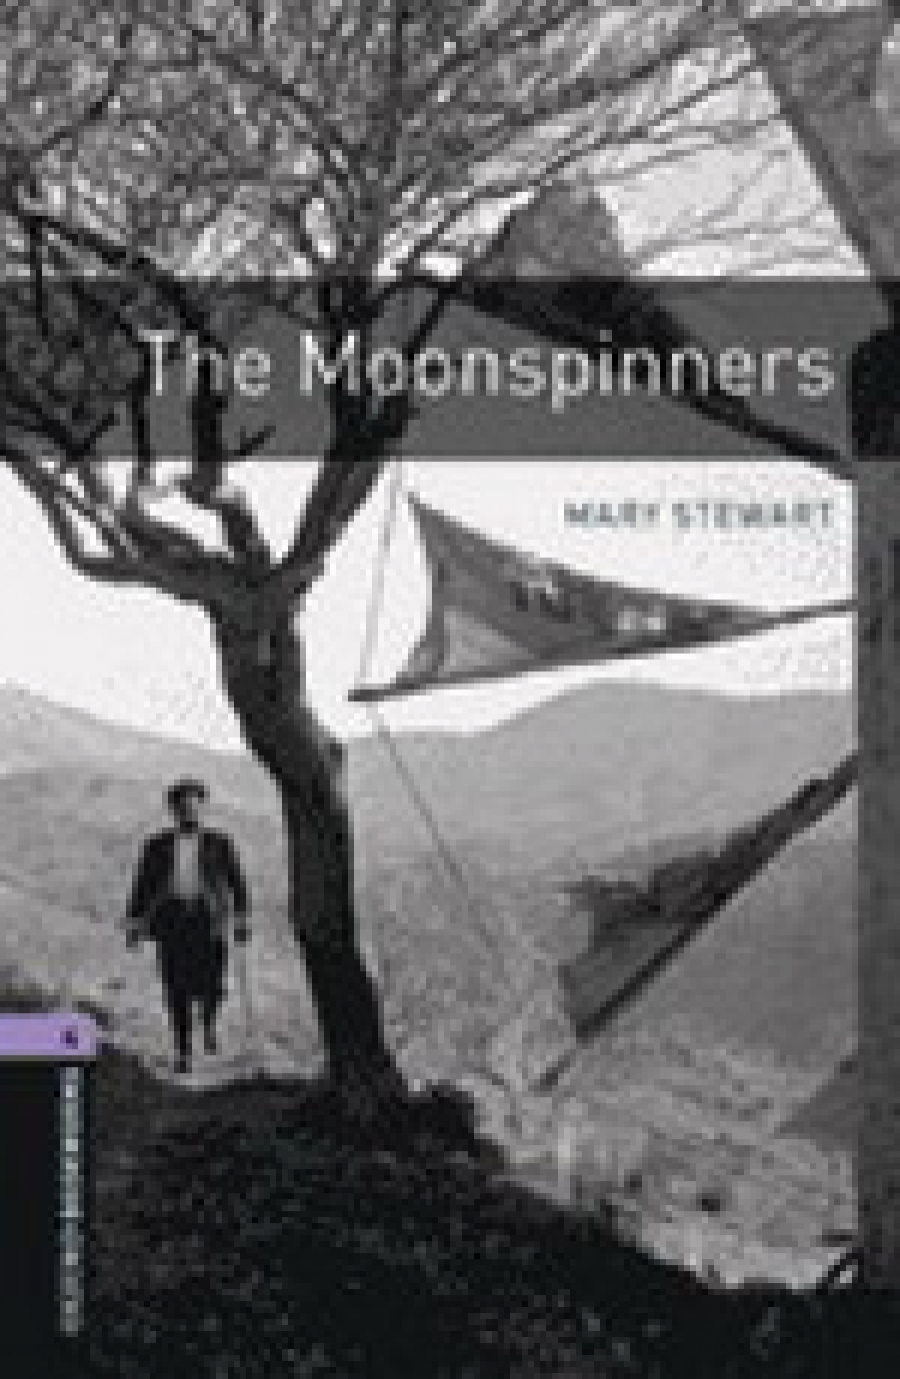 Retold by Diane Mowat, Mary Stewart OBL 4: The Moonspinners 